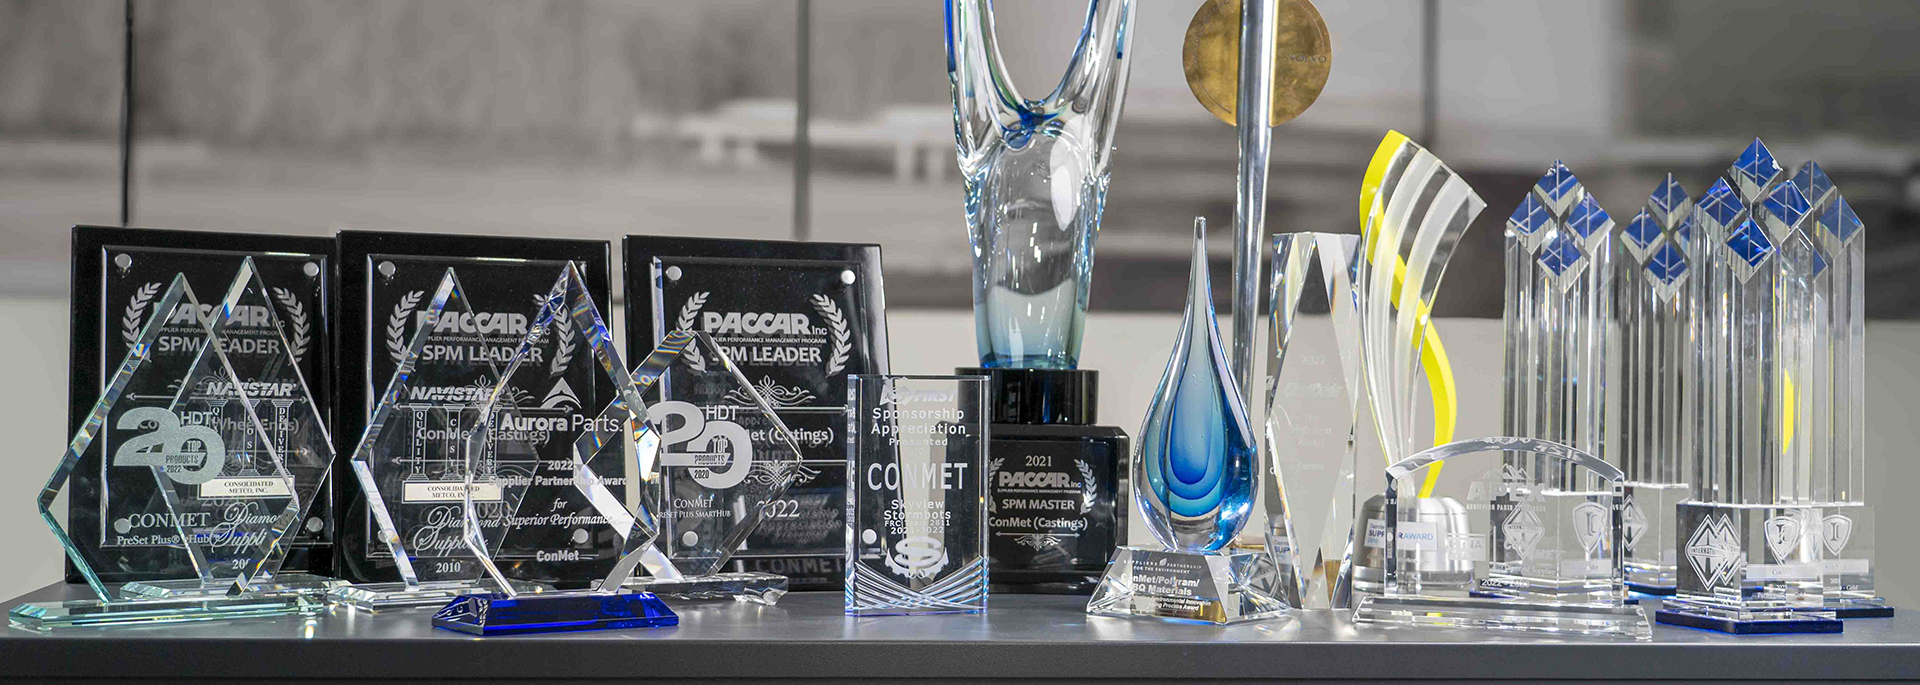 Counter full of industry awards for ConMet products and quality